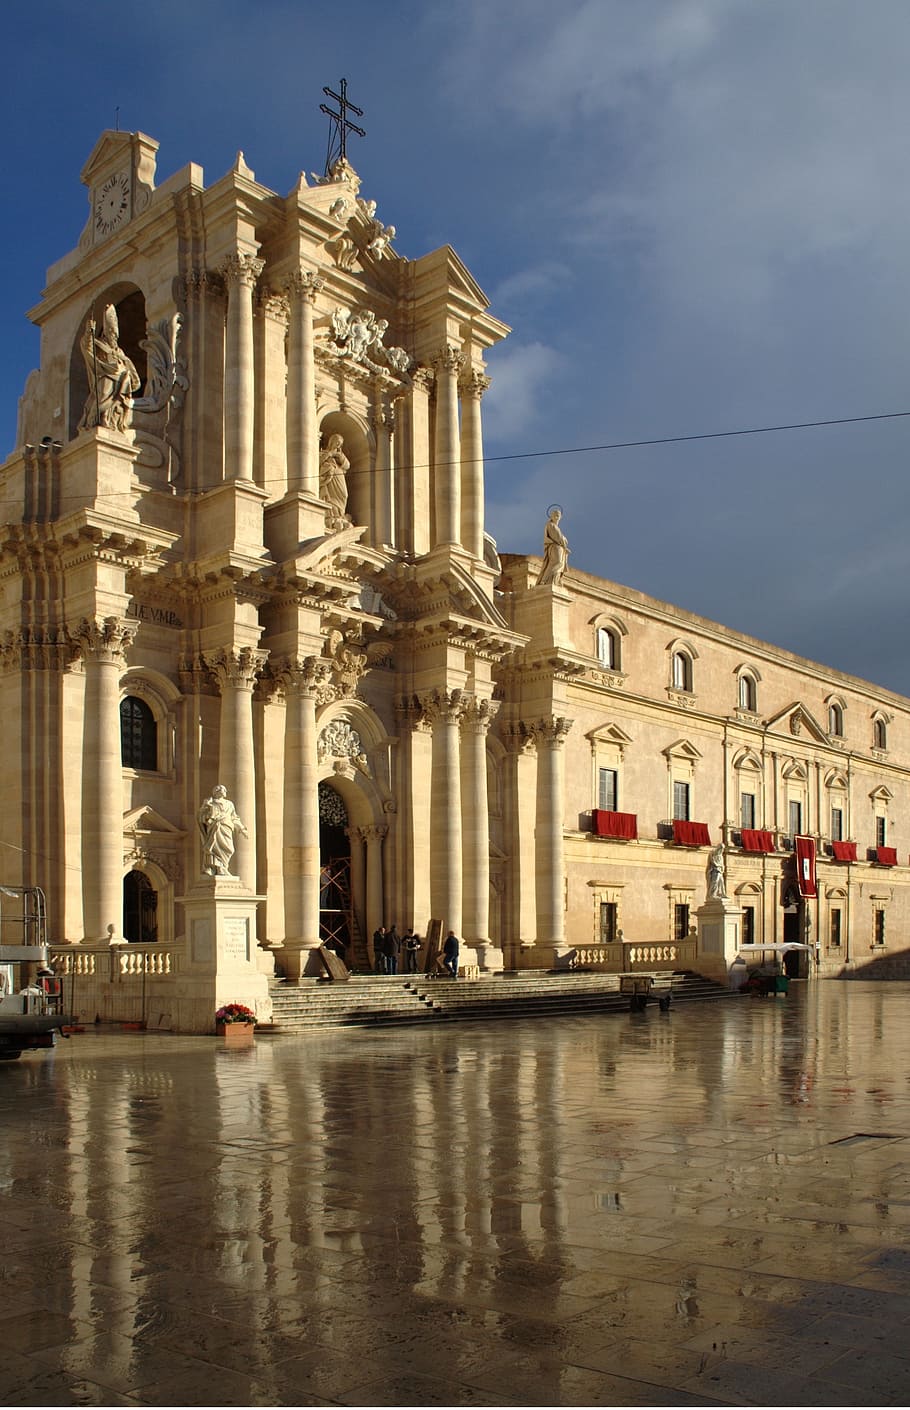 gray concrete building, italy, sicily, siracusa, piazza del duomo, dom, church, architecture, built structure, building exterior